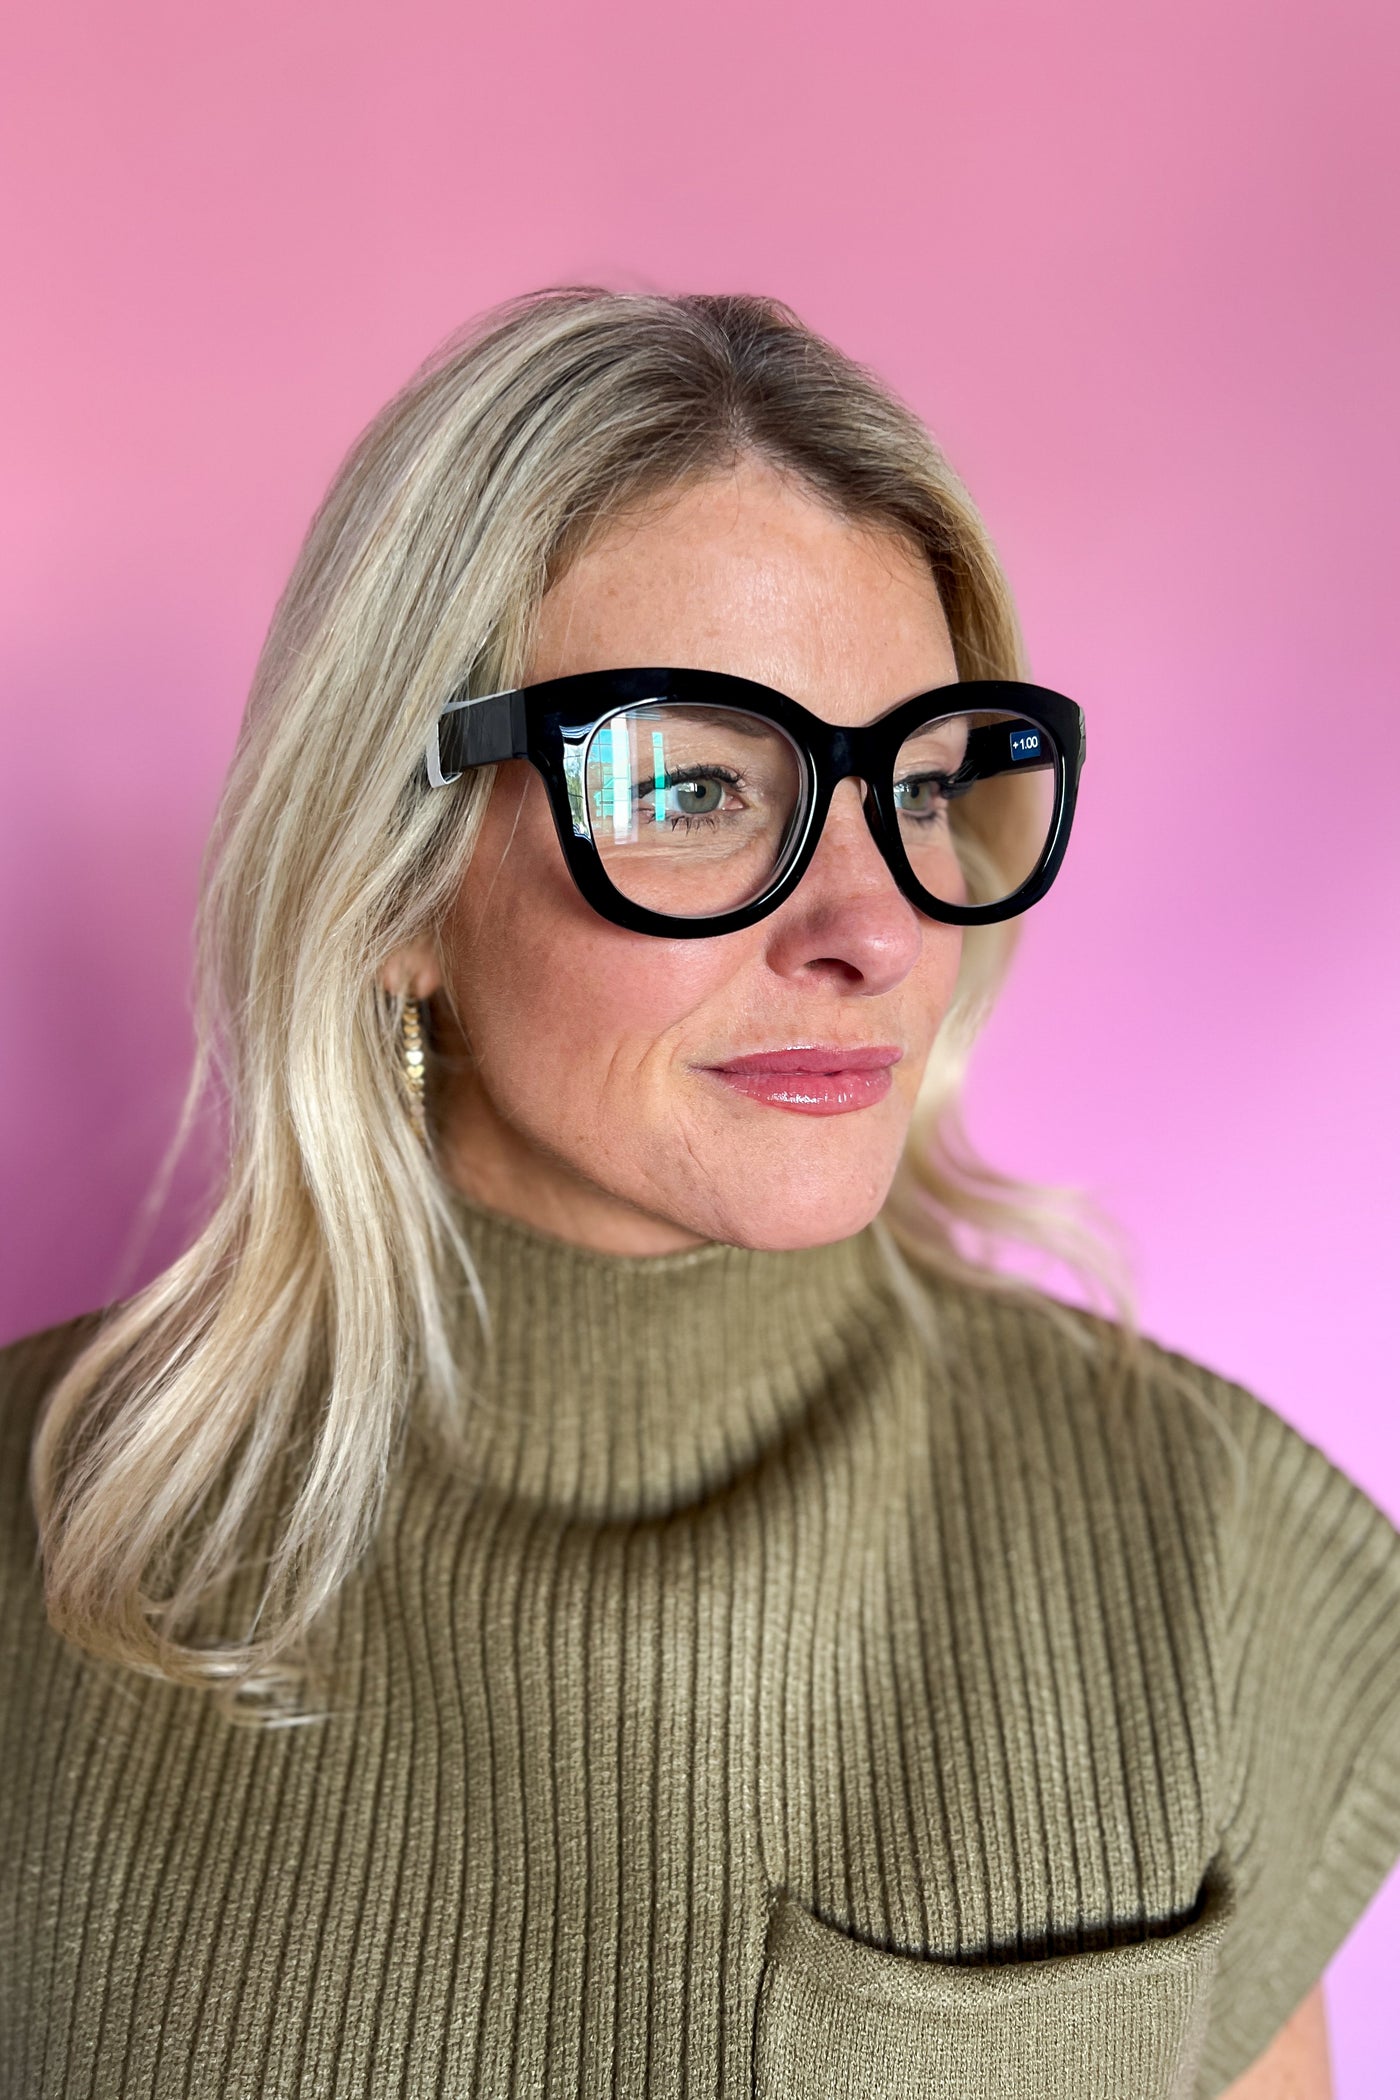 Center Stage Focus Readers, black by Peepers